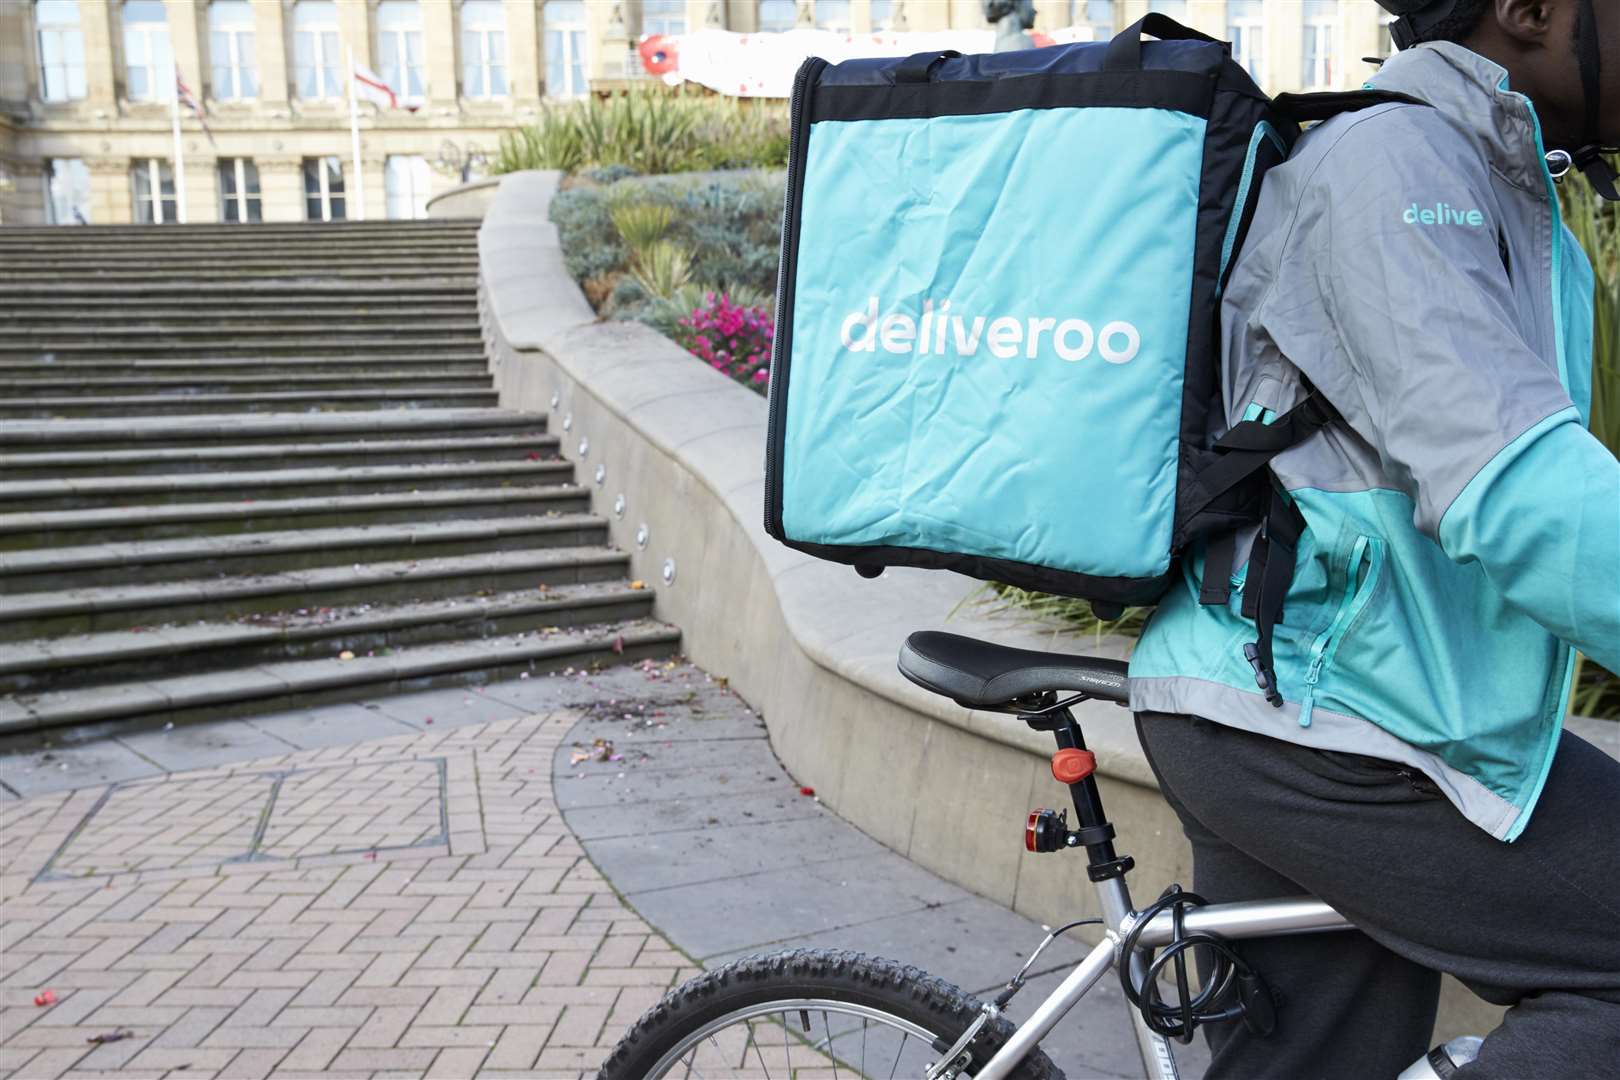 The delivery service will launch this month